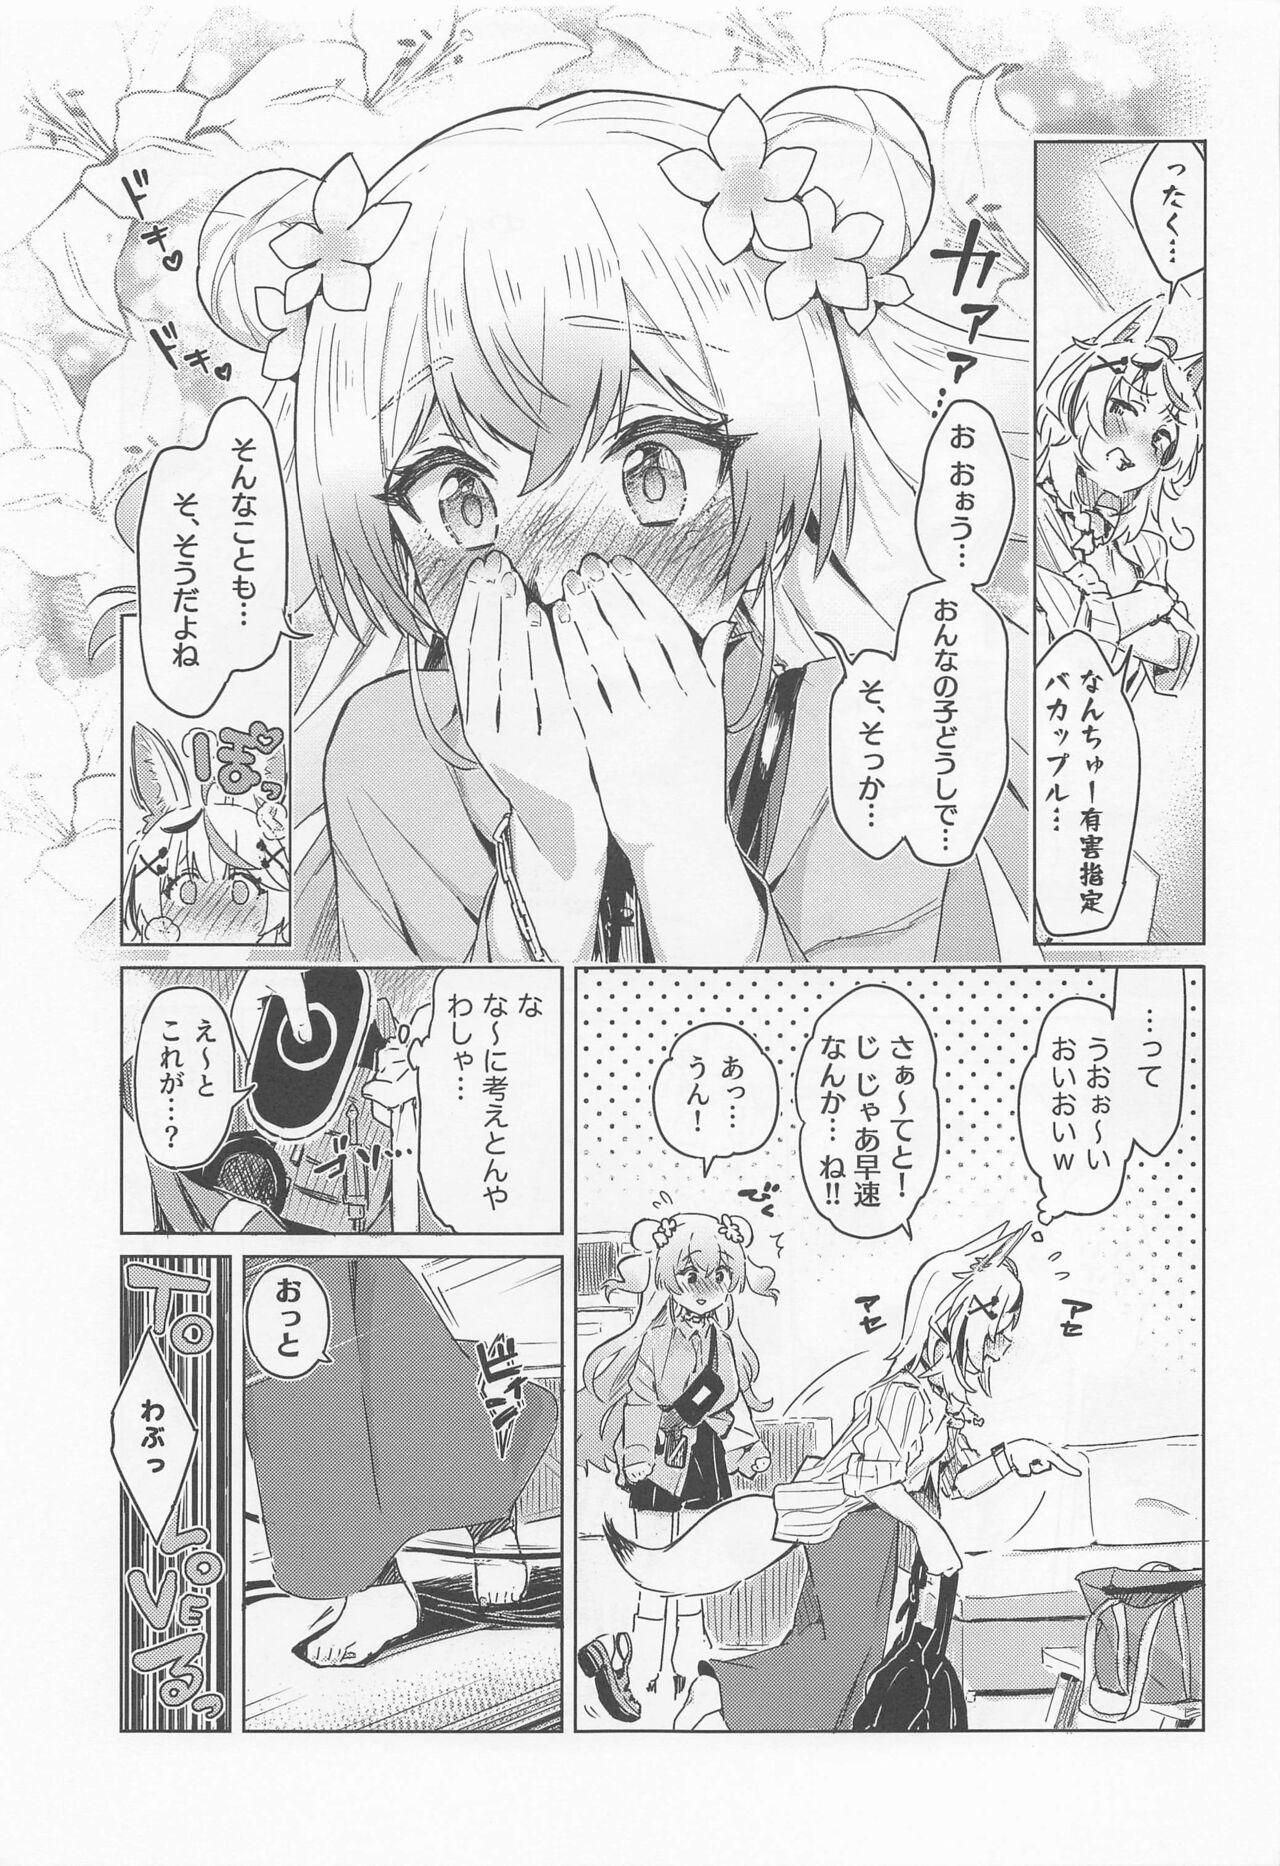 Fennec wa Iseijin no Yume o Miru ka - Does The Fennec Dream of The Lovely Visitor? 9